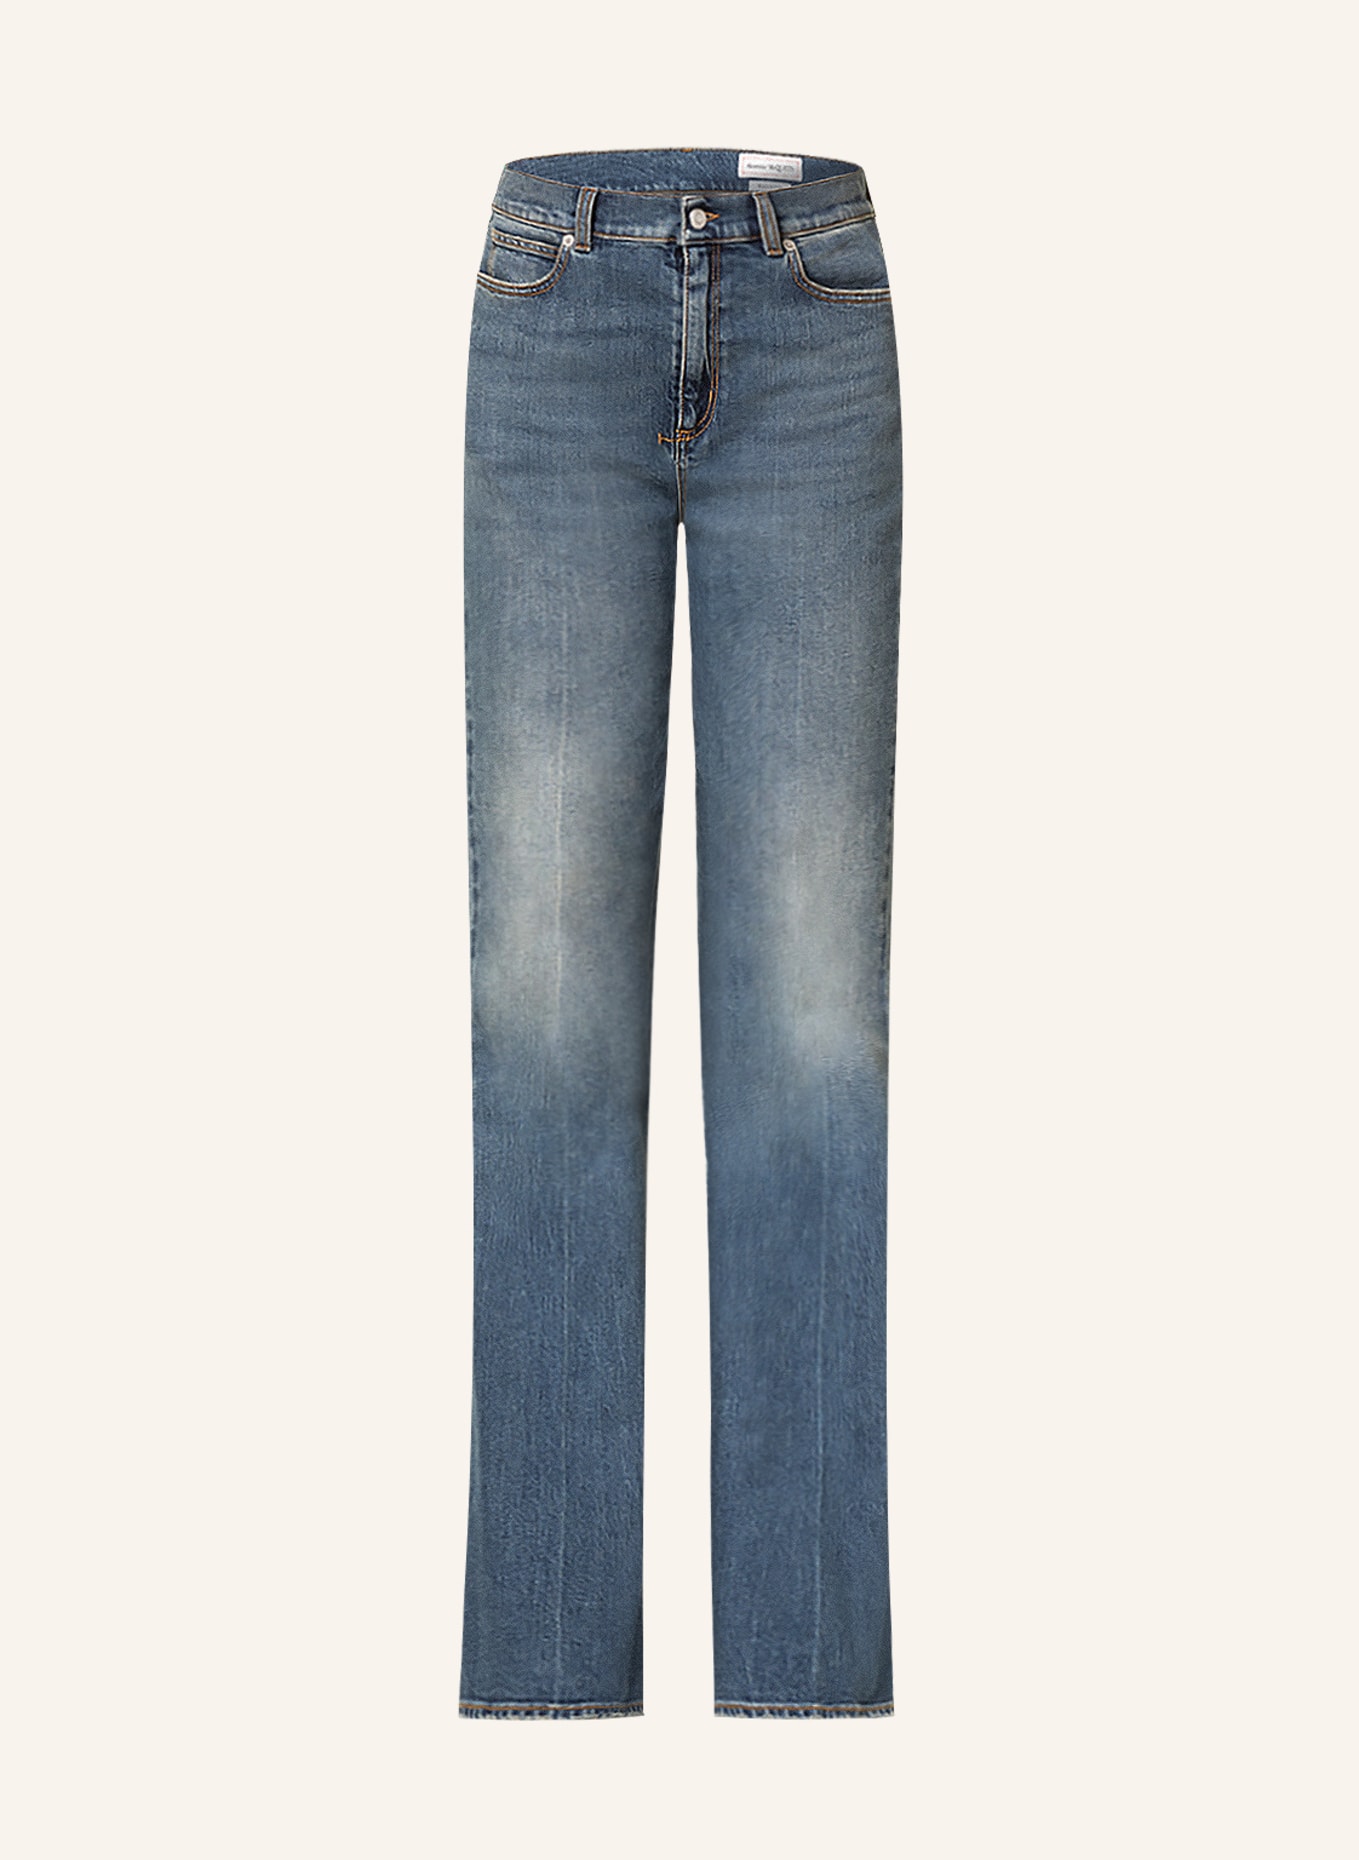 Alexander McQUEEN Flared jeans, Color: 4251 DISTRESSED WASH (Image 1)